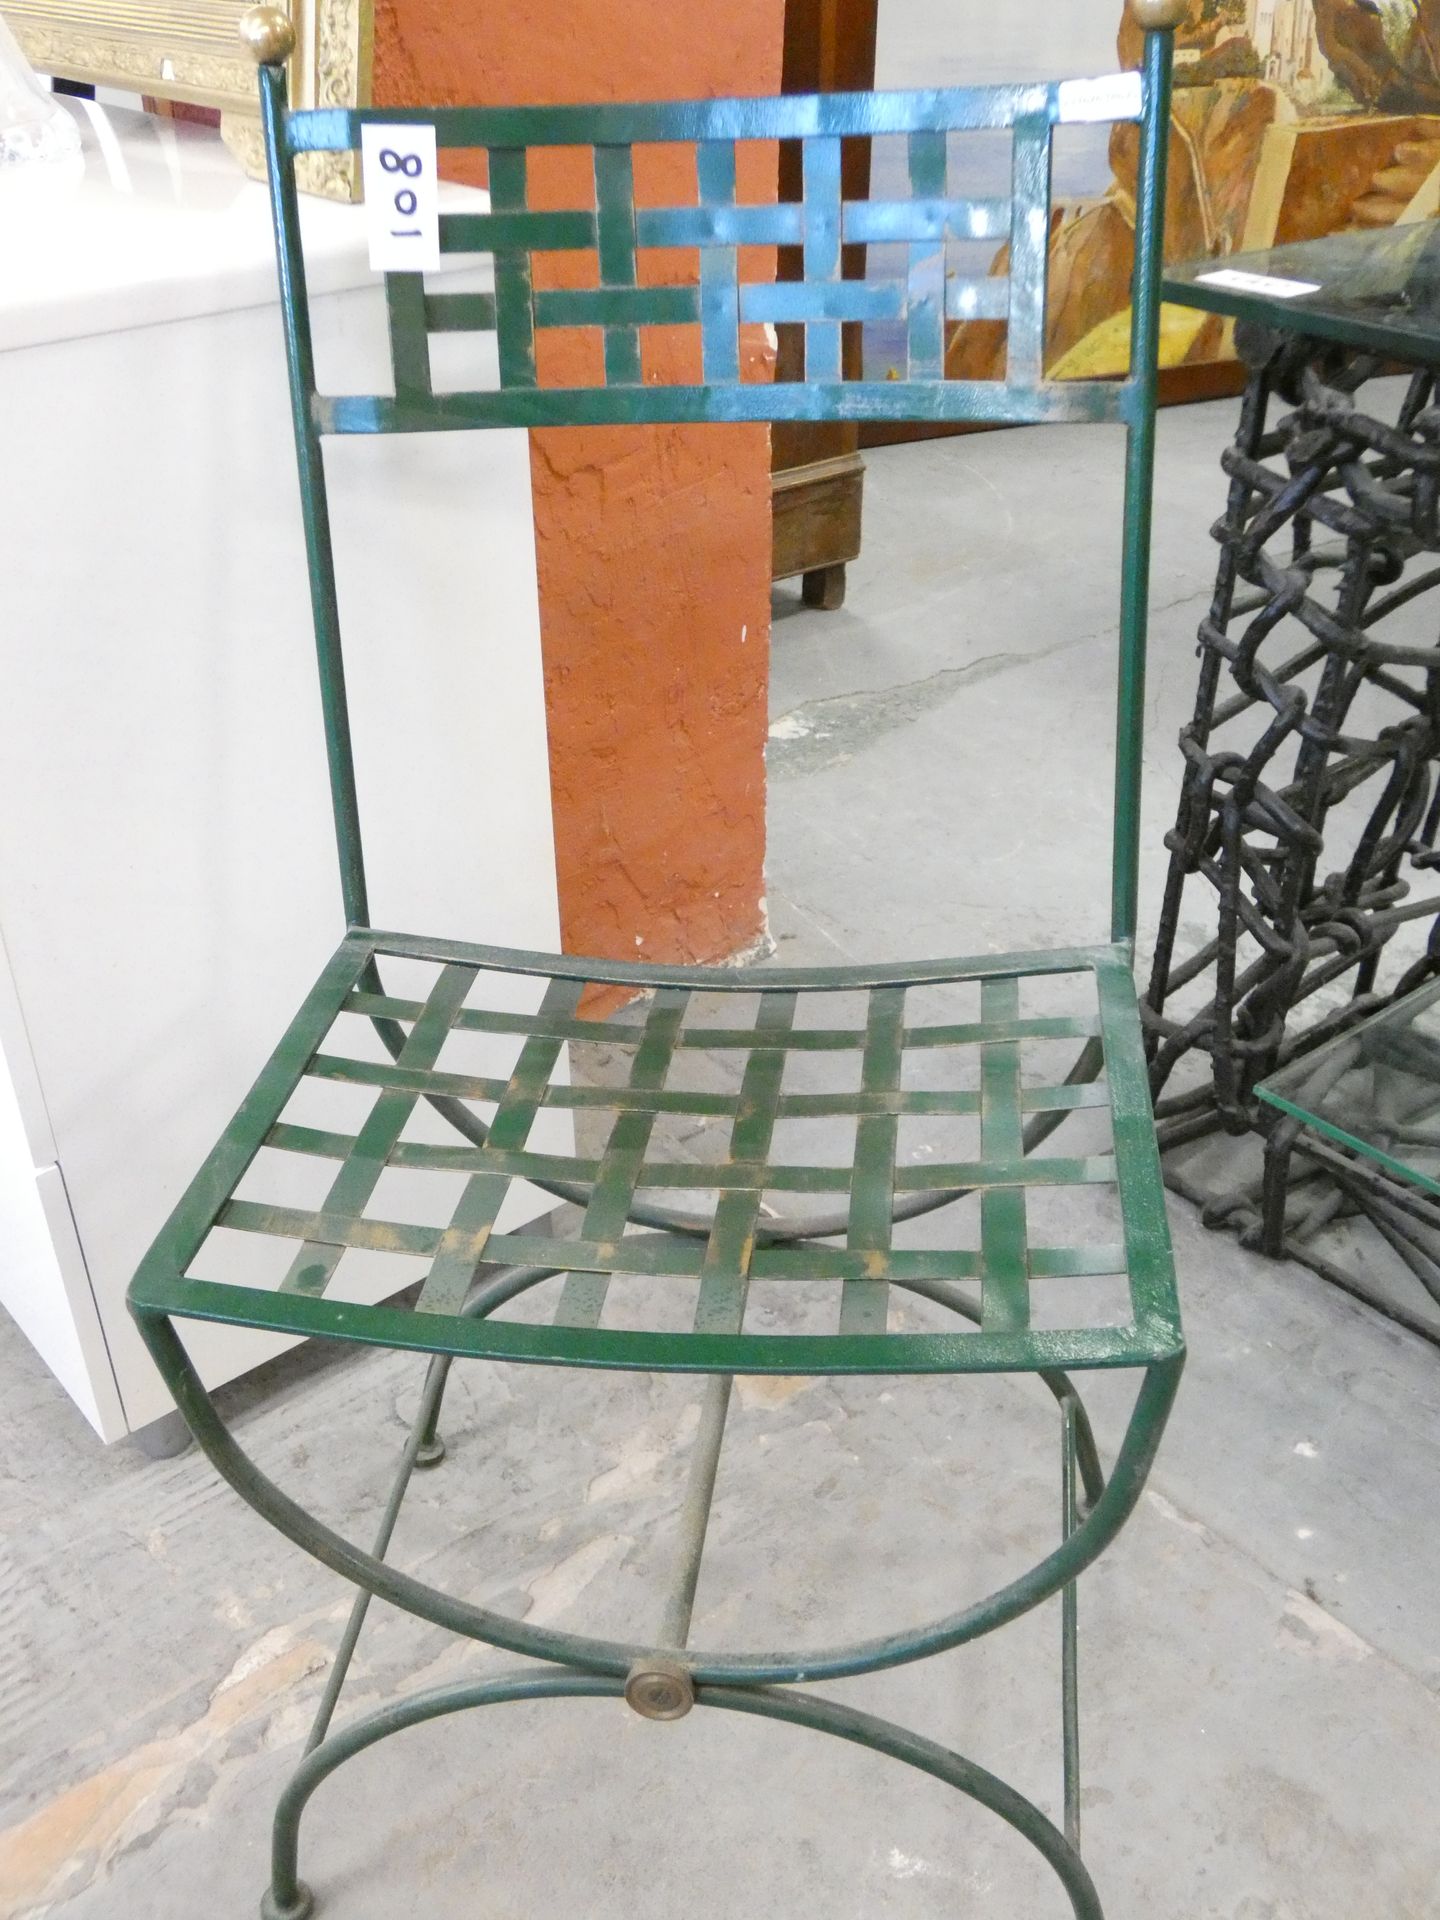 Null 
1 GREEN WROUGHT IRON CHAIR